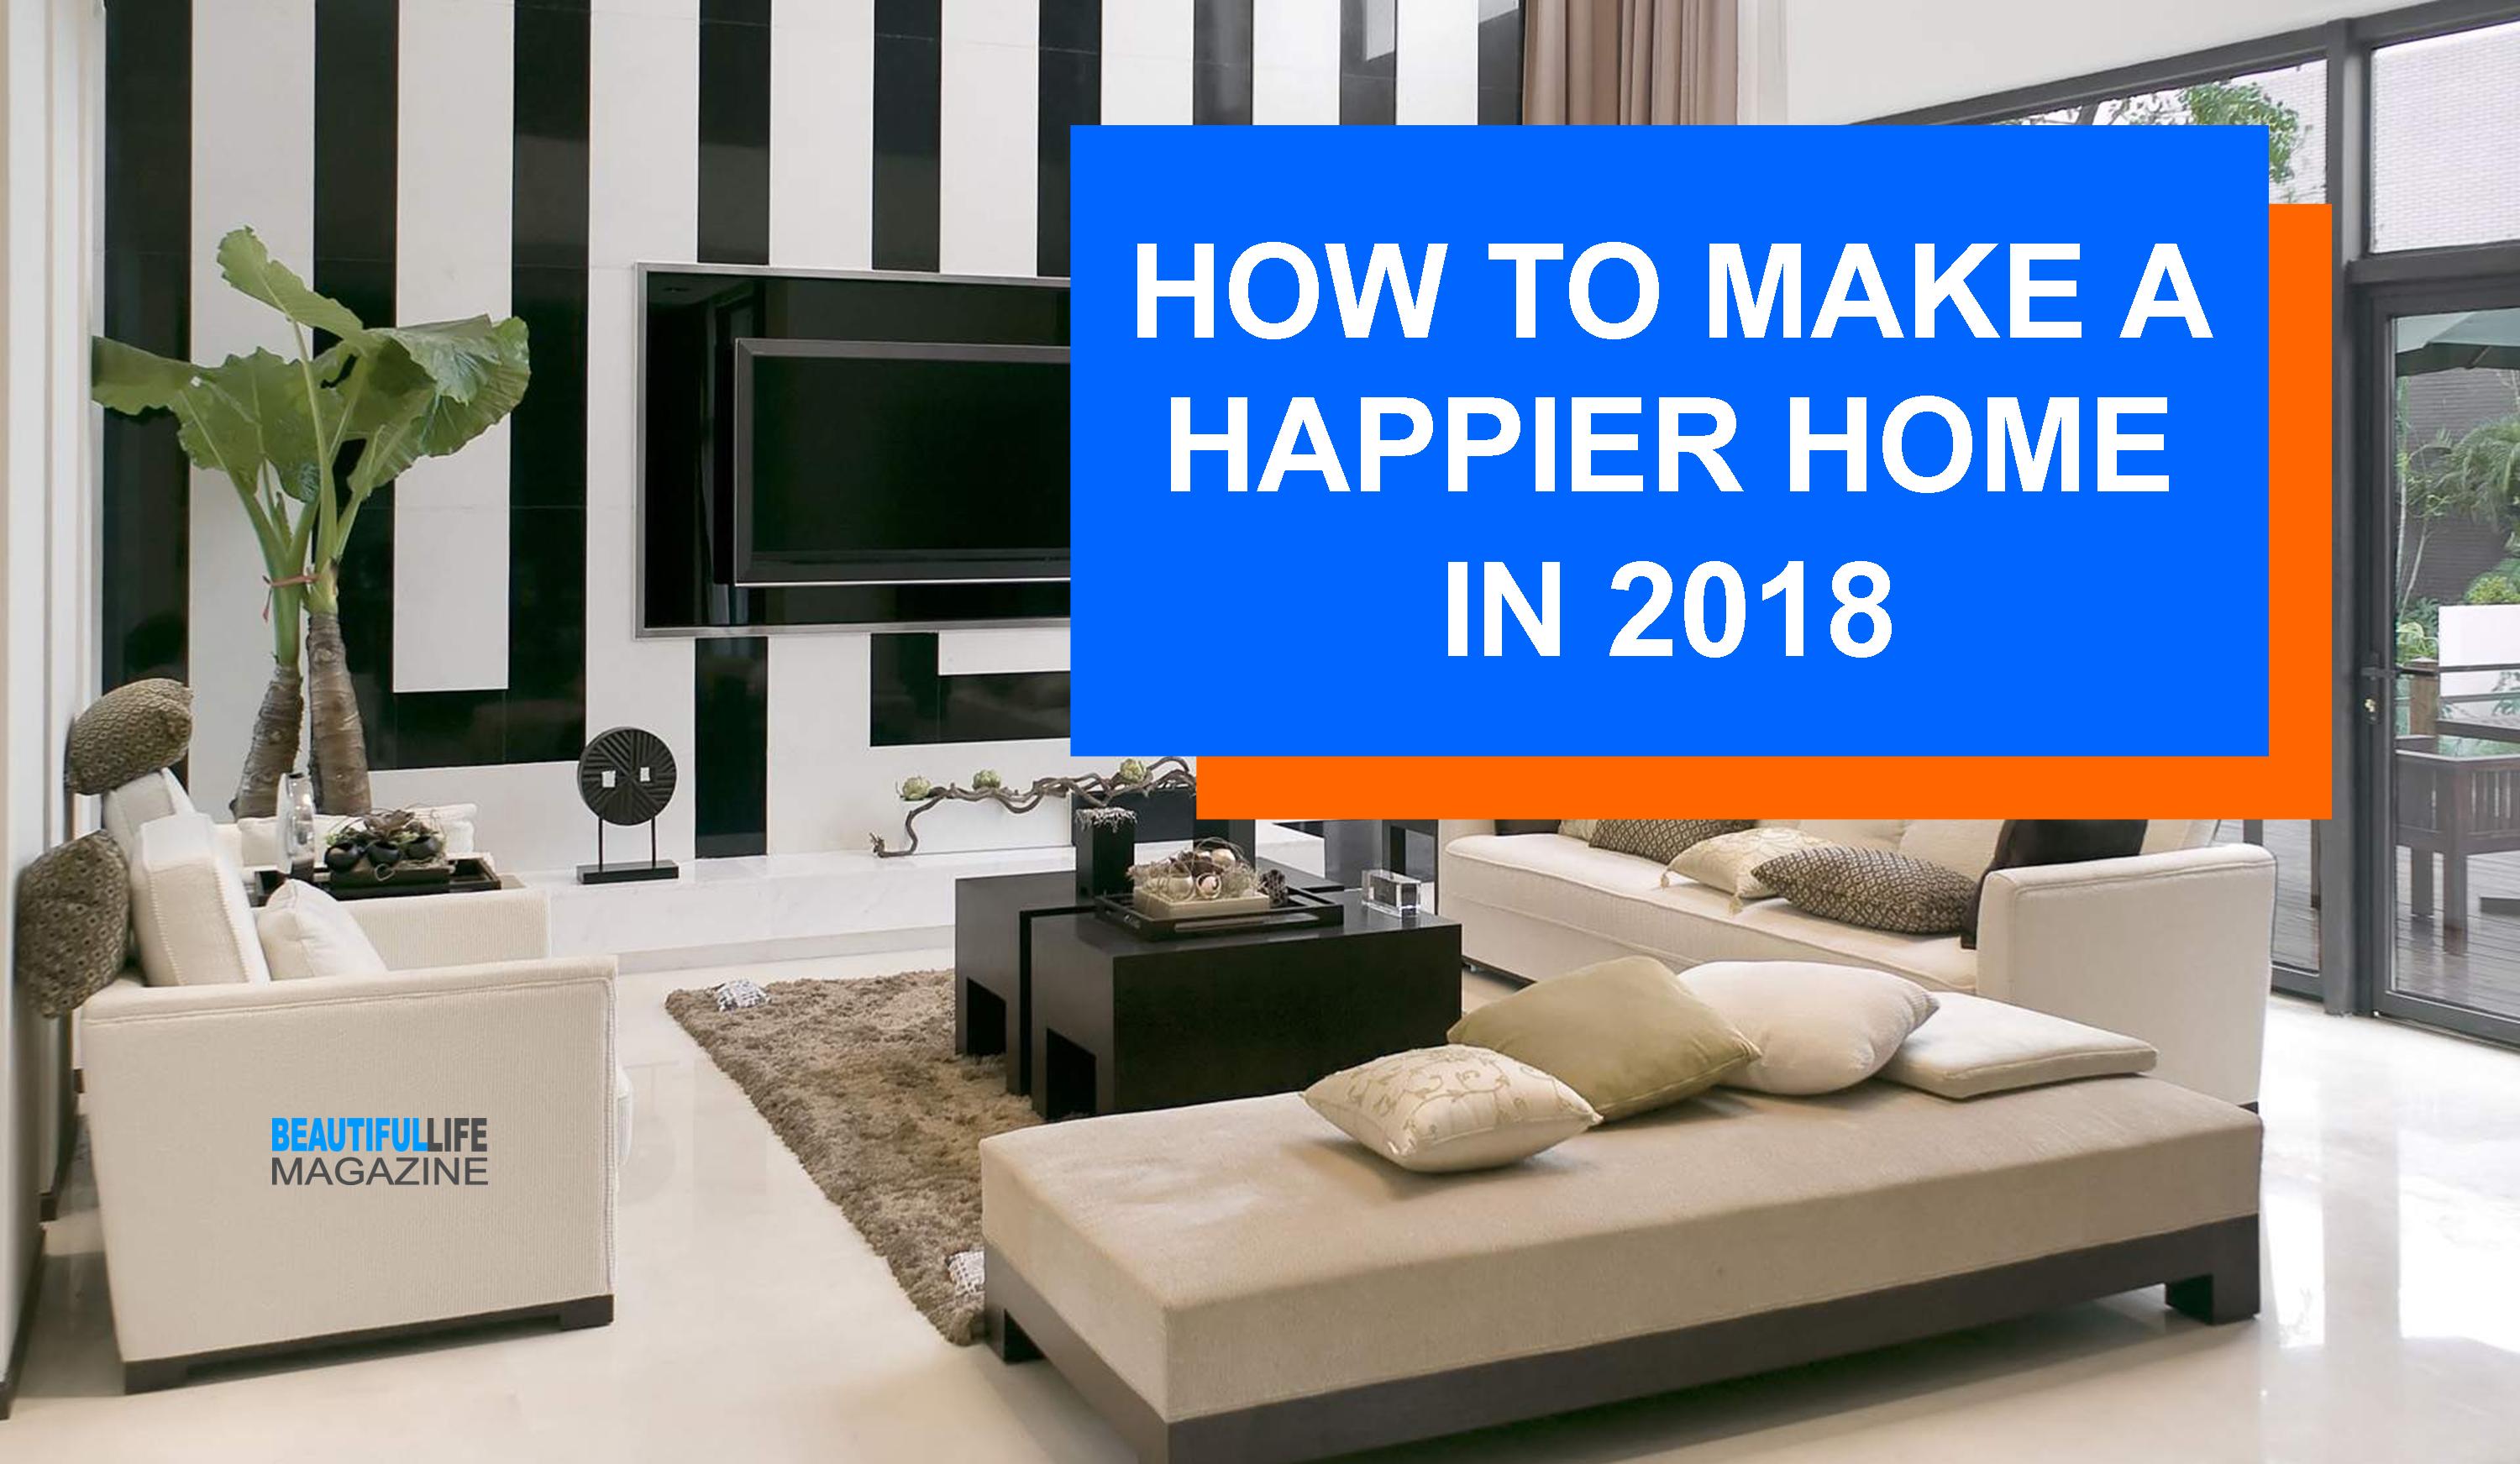 Some New Year's resolutions, like hauling your bum to the gym on the regular, require commitment. But others, like zhooshing up your home for a fresh outlook, are easy as pie. We asked a few of our editors to share the one trick that make a happier home.